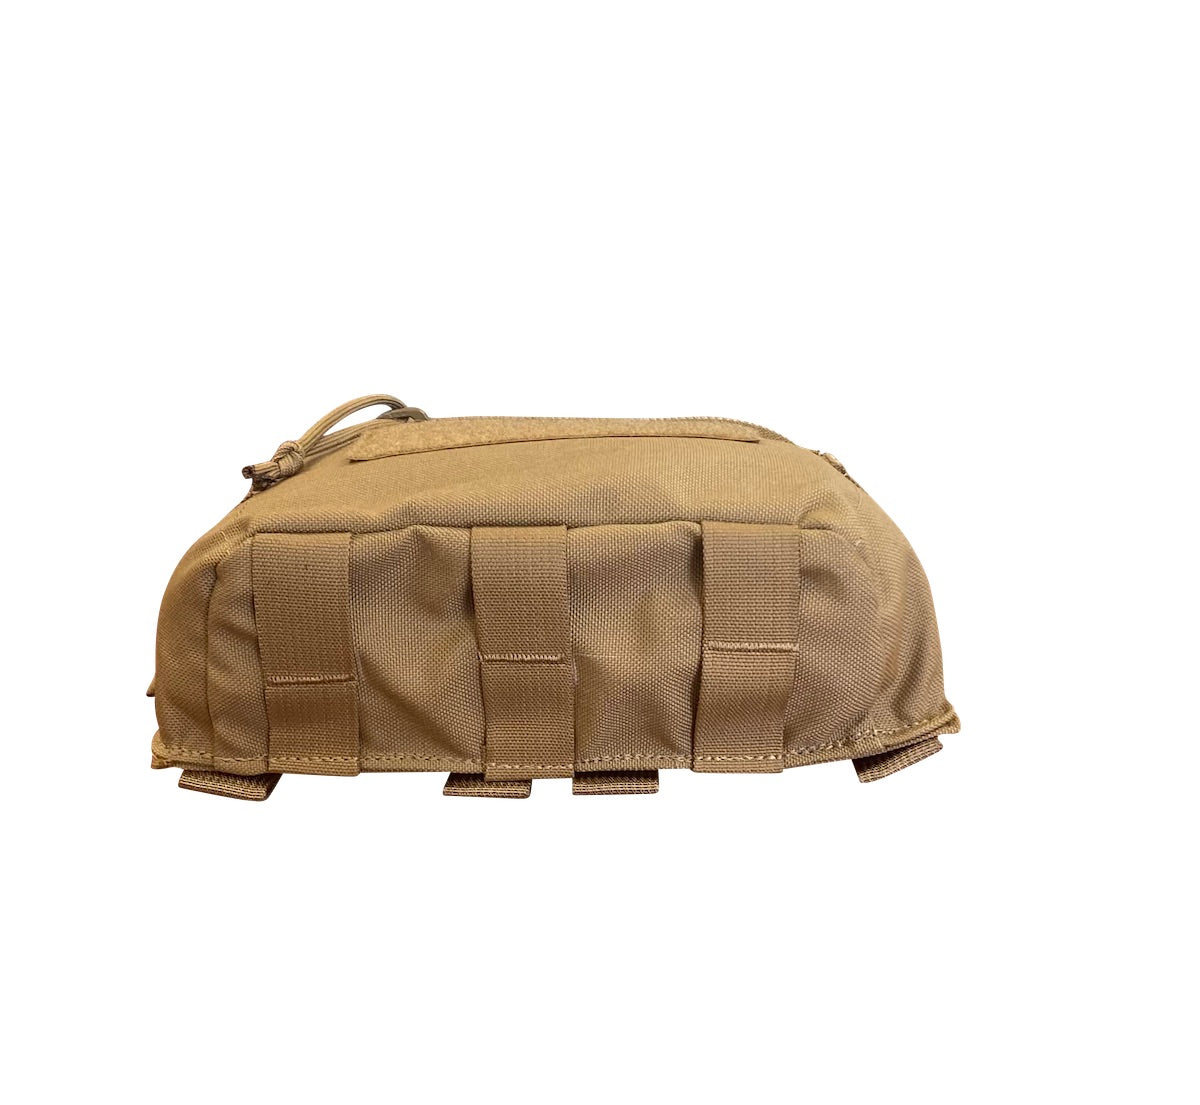 Bds Tactical Fanny Pack, Coyote